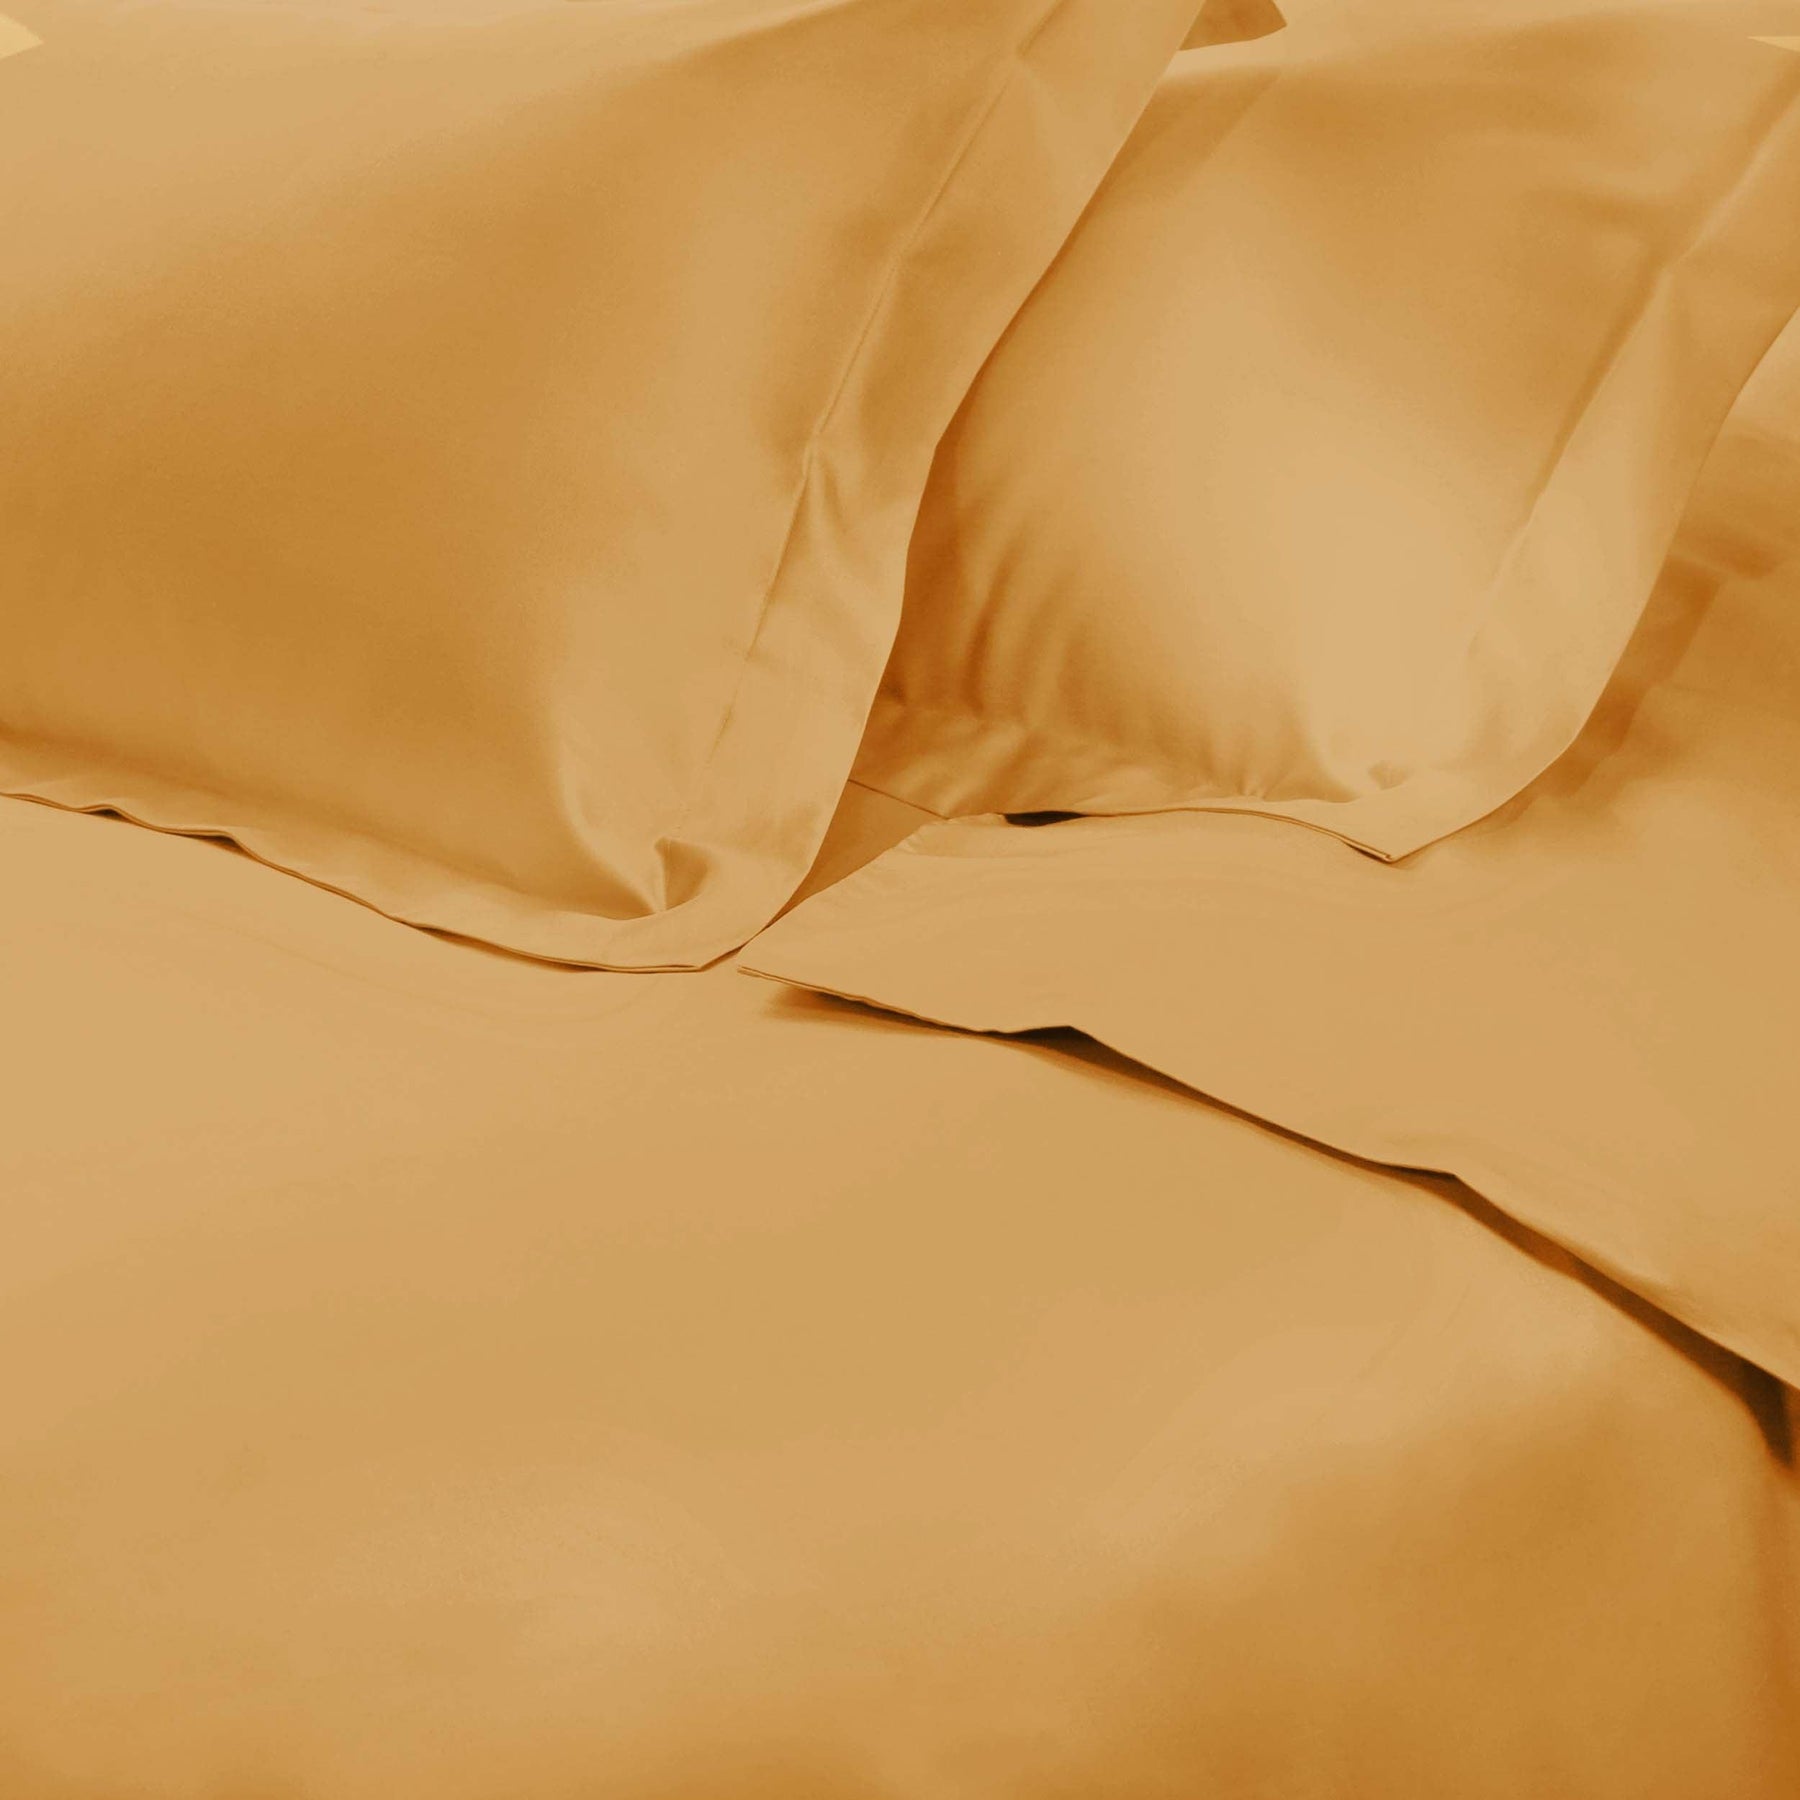 Egyptian Cotton 650 Thread Count Solid Duvet Cover Set - Duvet Cover Set by Superior - Superior 